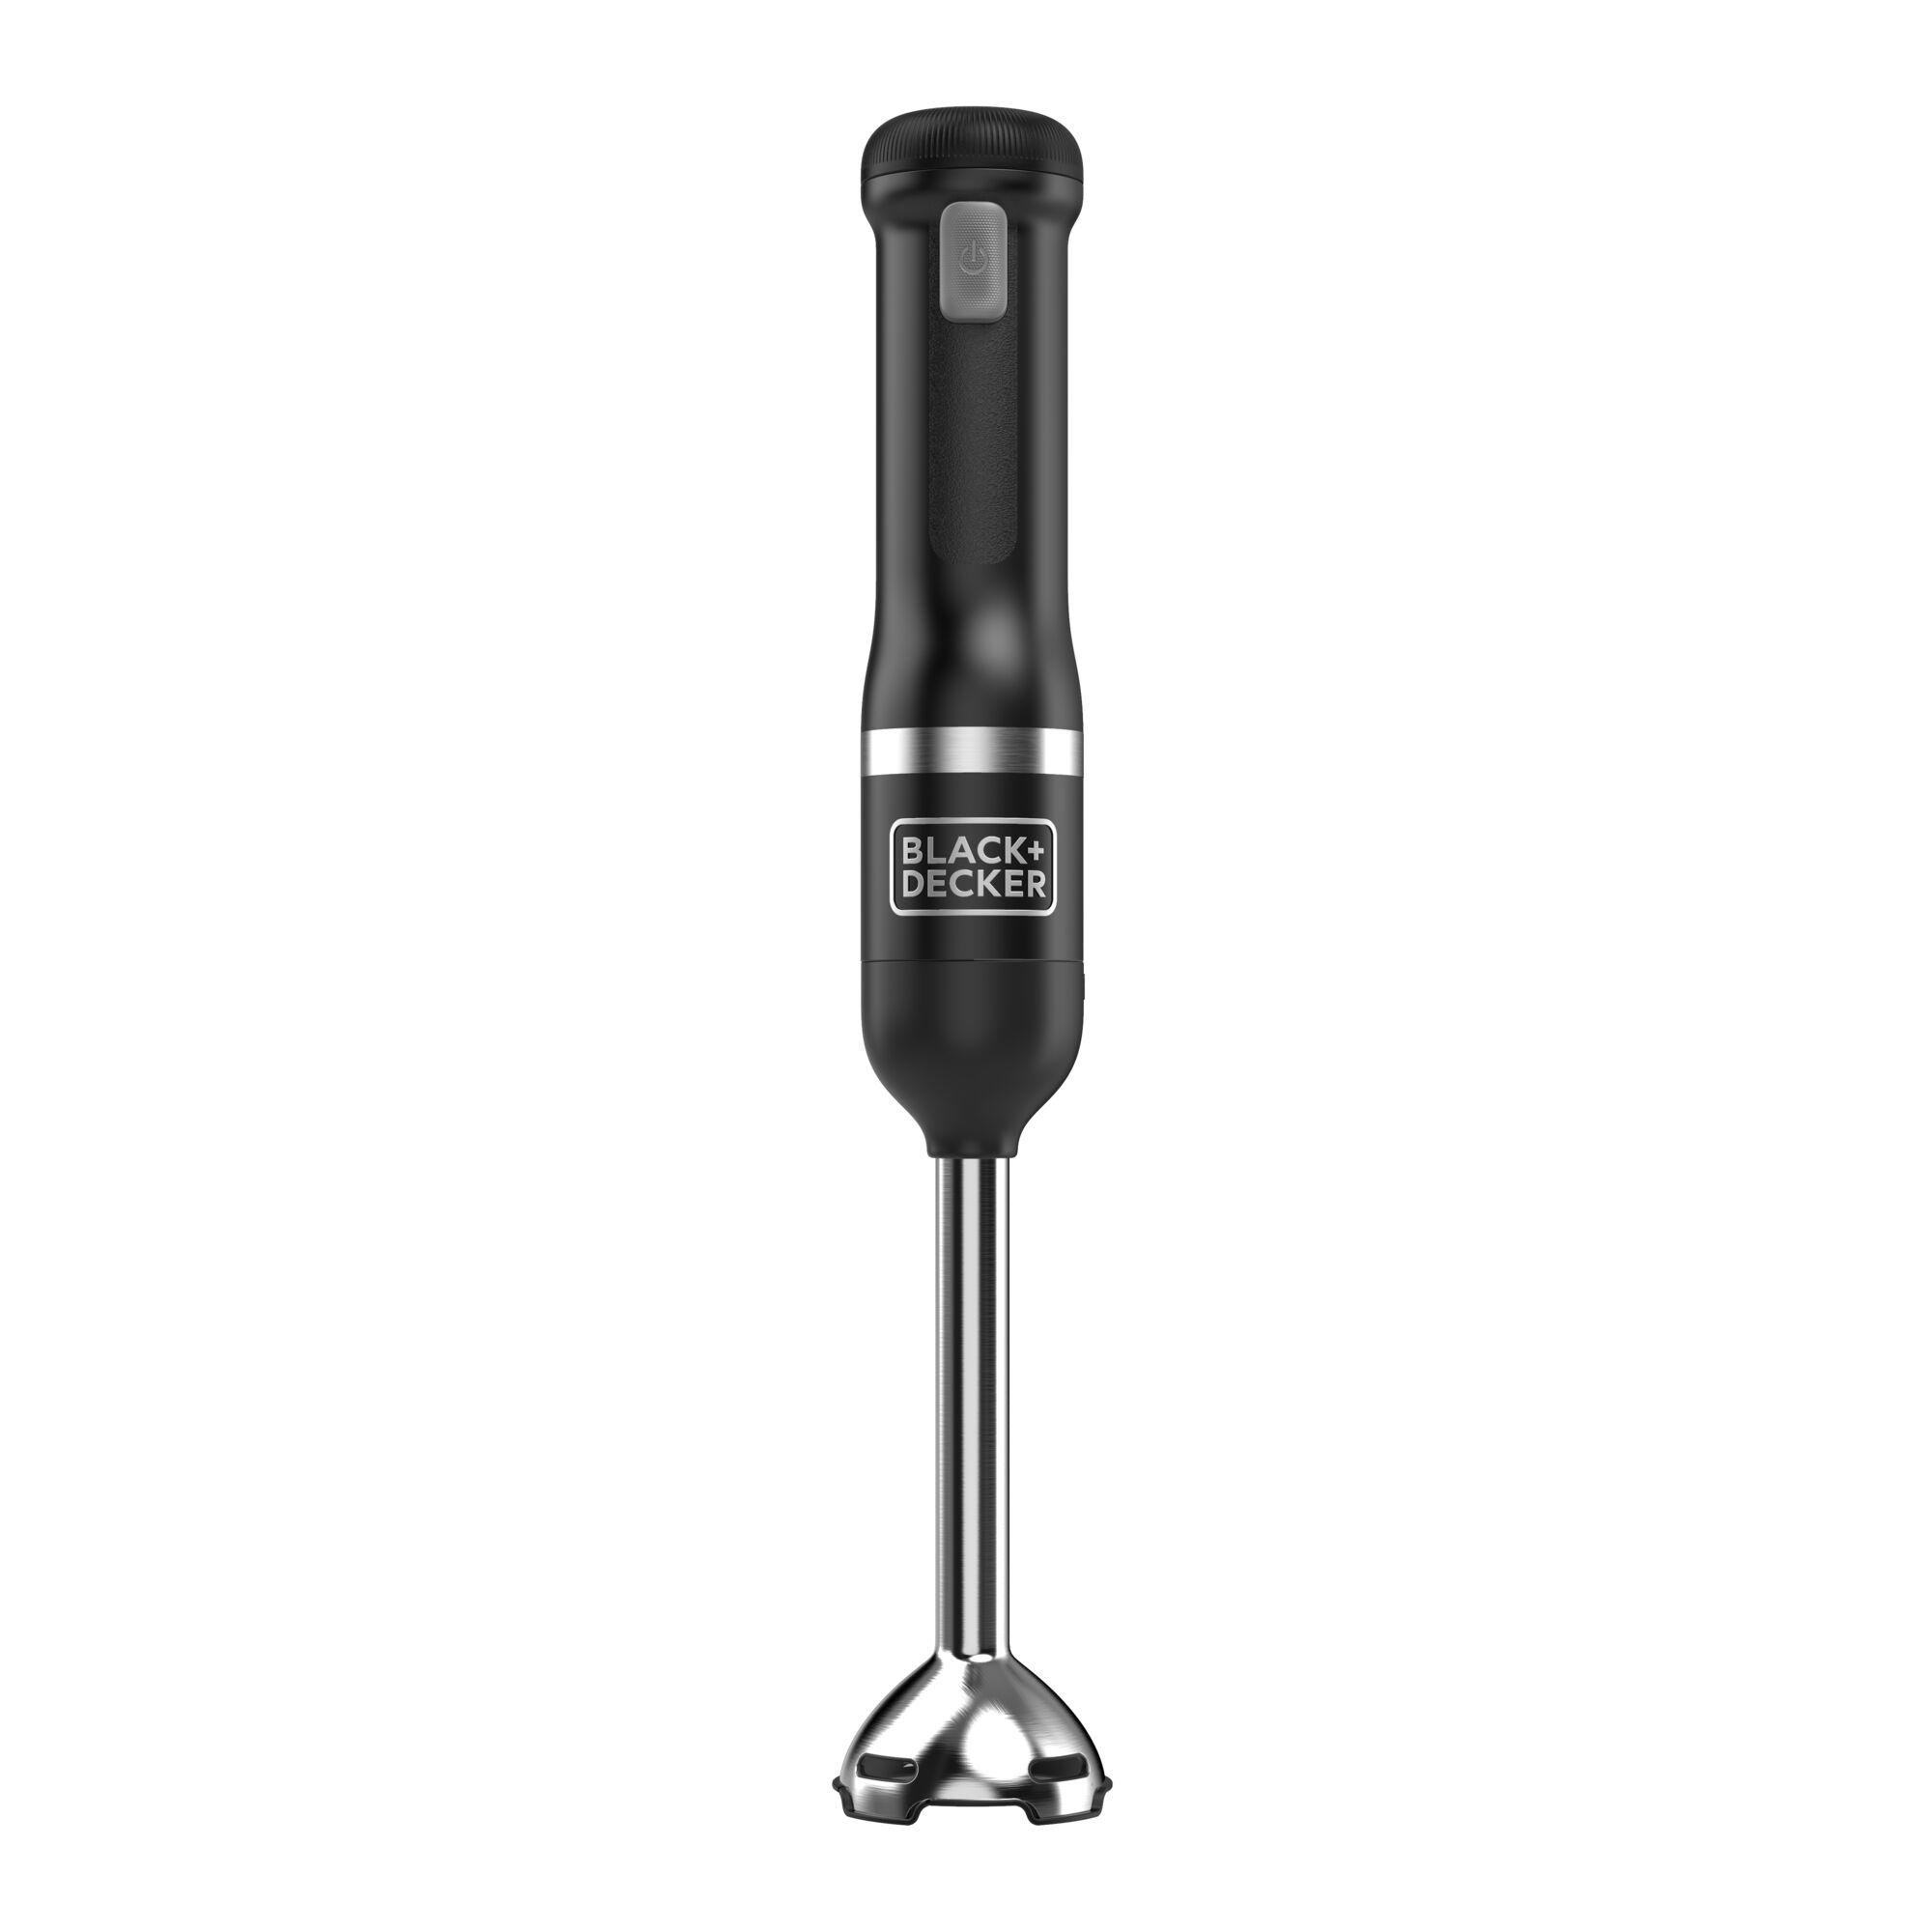 Profile front view of the BLACK+DECKER kitchen wand immersion blender attachment attached to the black wand base